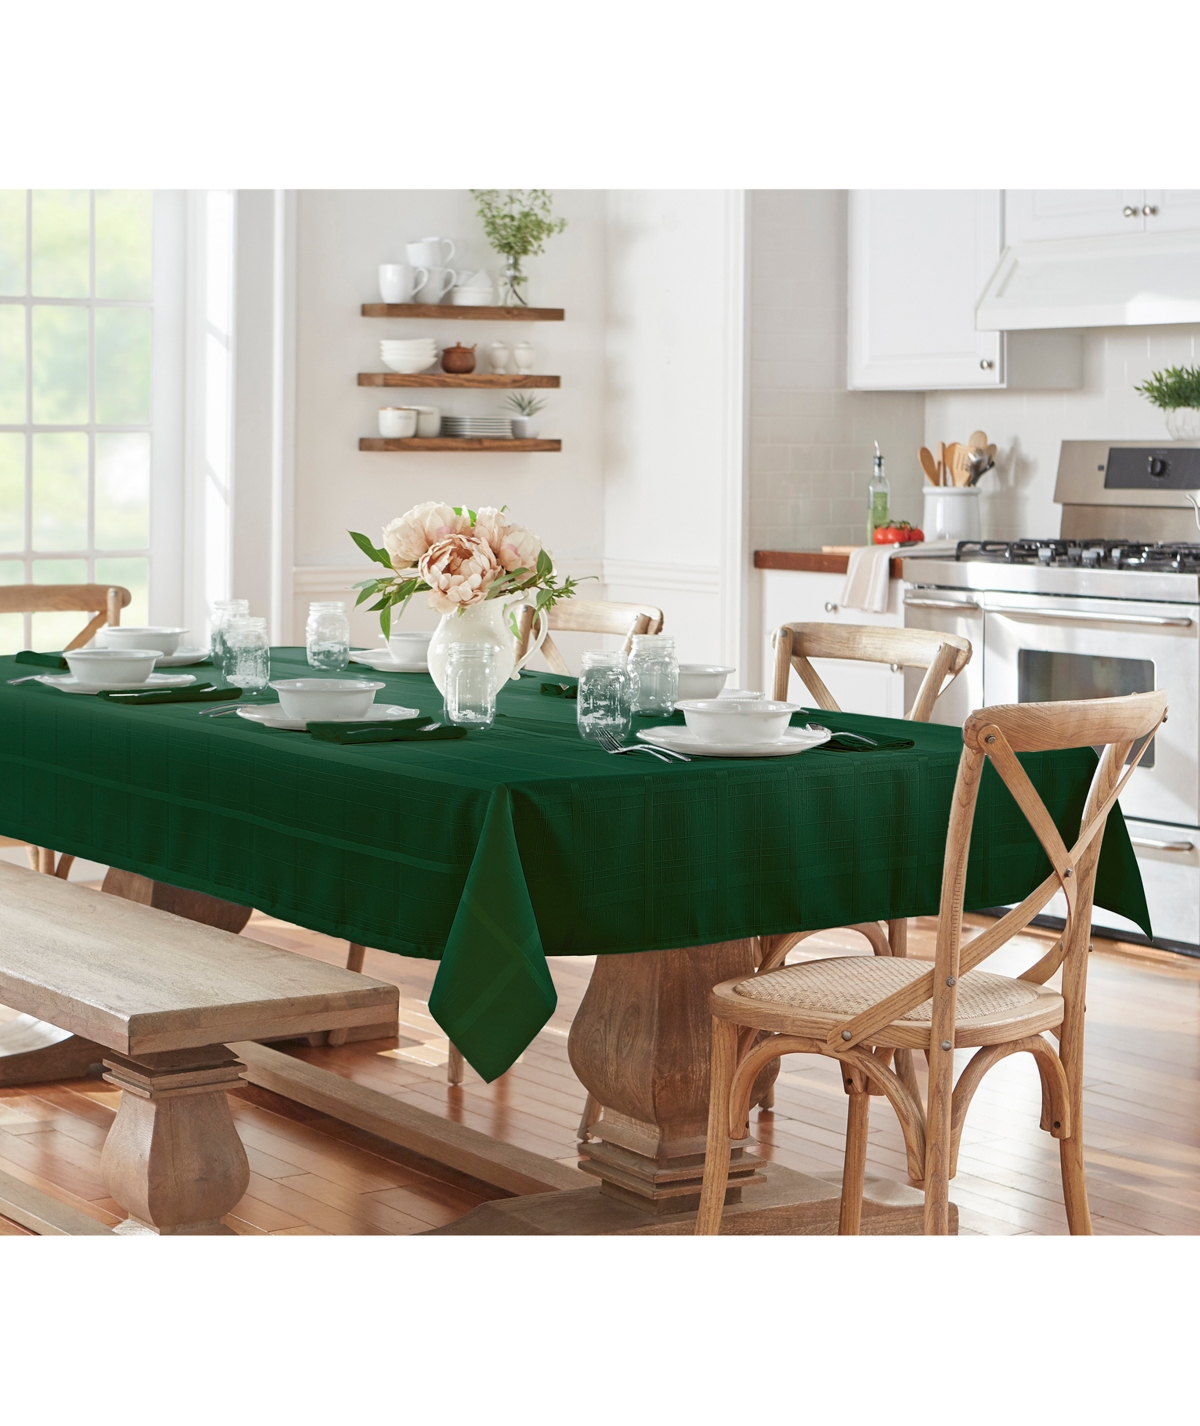 Elrene Elegance Plaid 60" X 120" Oblong Tablecloth In Holly Green